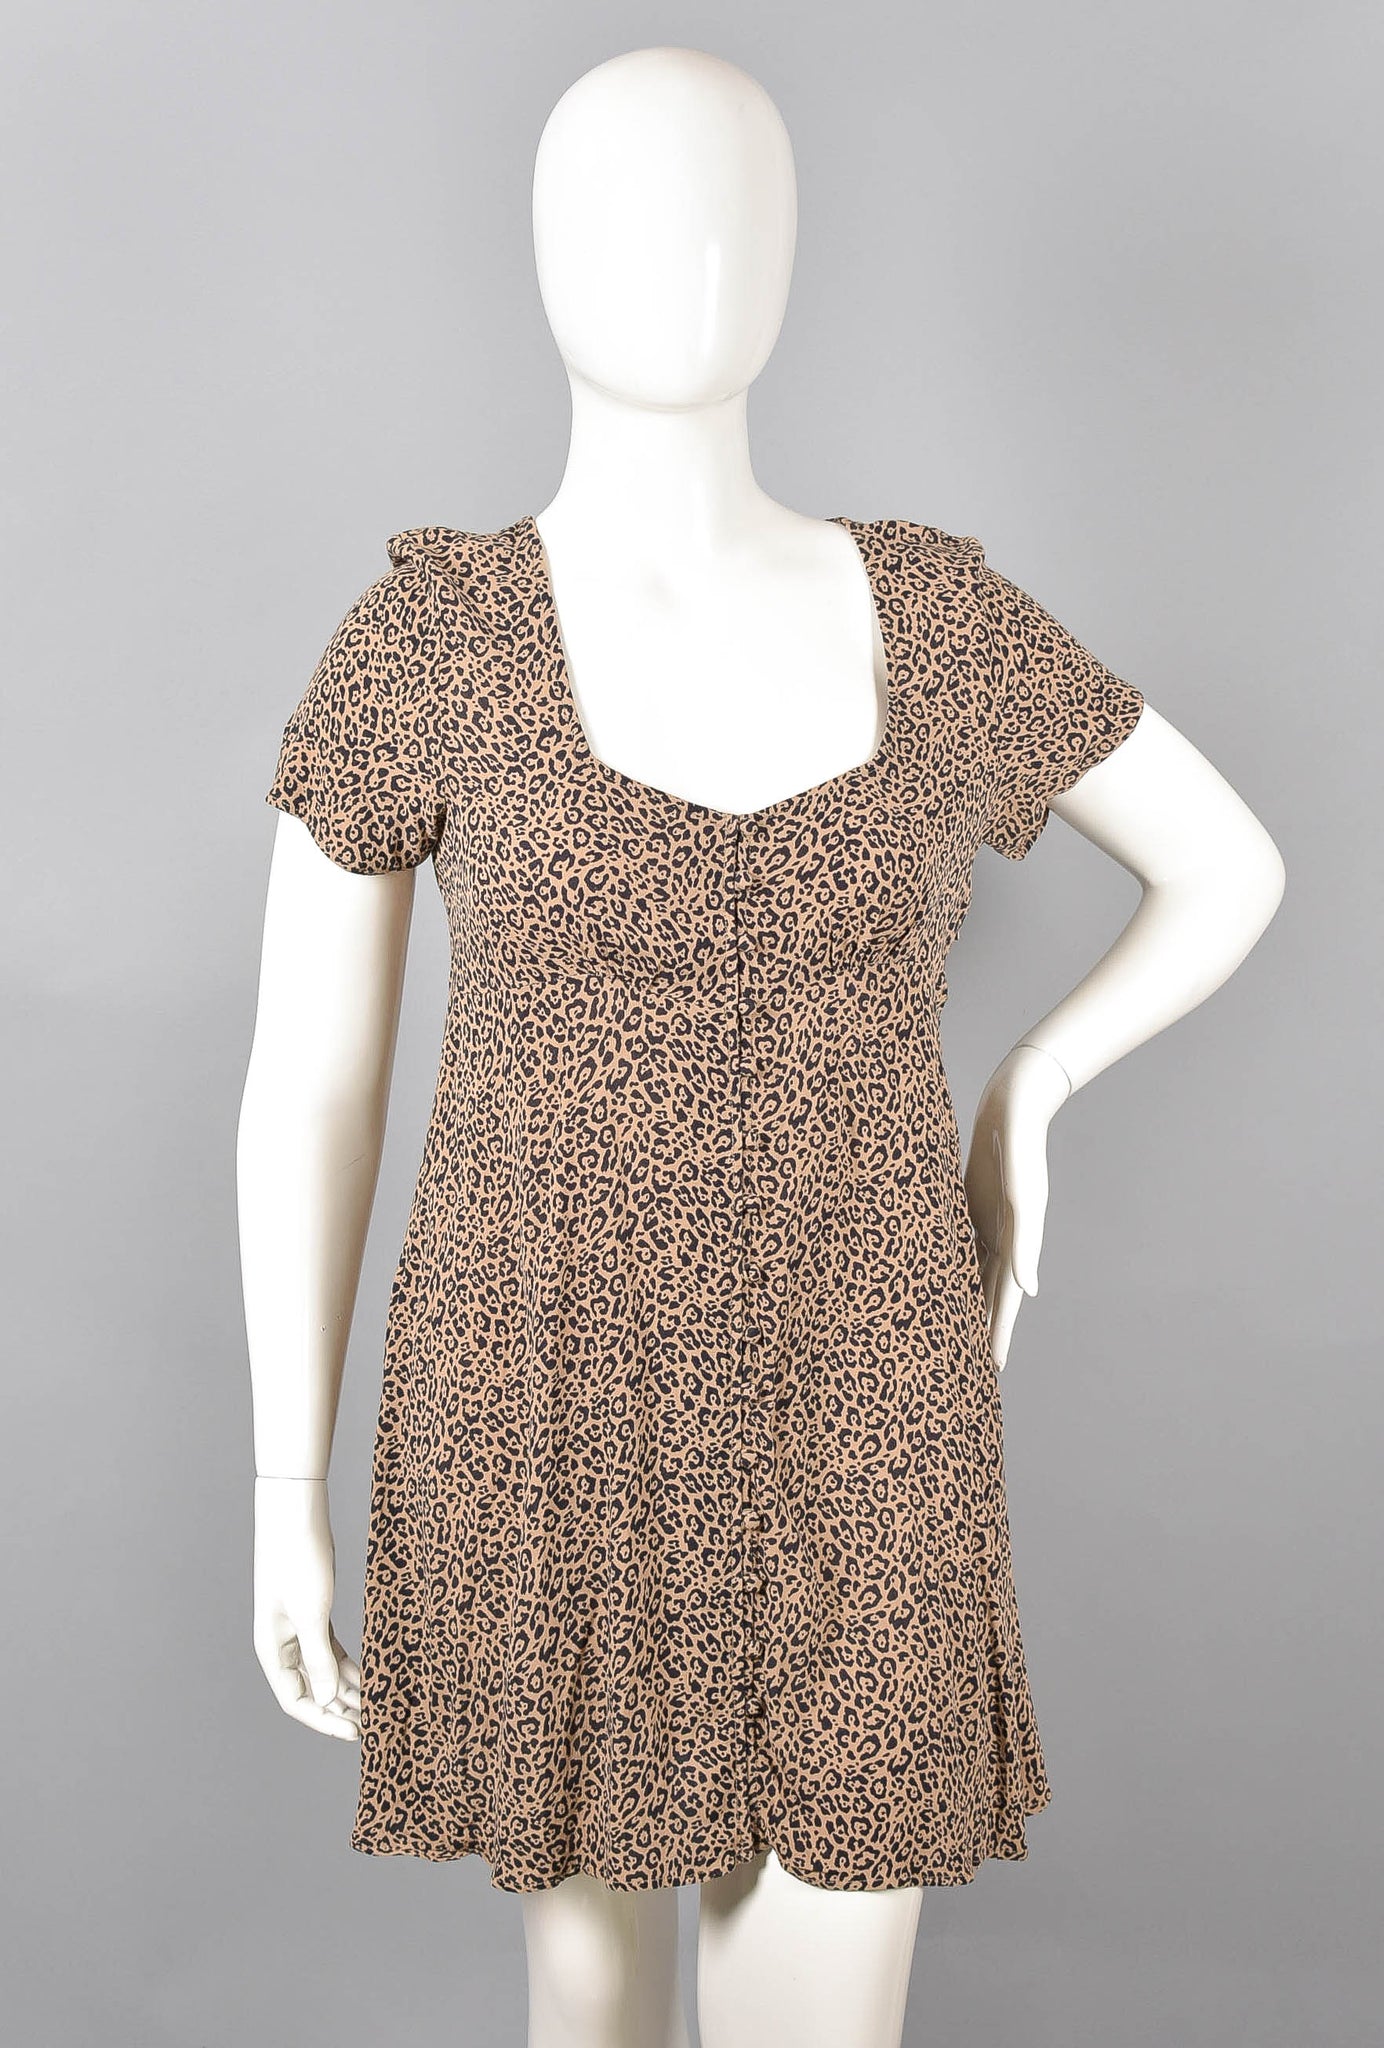 AMERICAN EAGLE OUTFITTERS - Vestido Mini Animal Print Cafe Y Negro